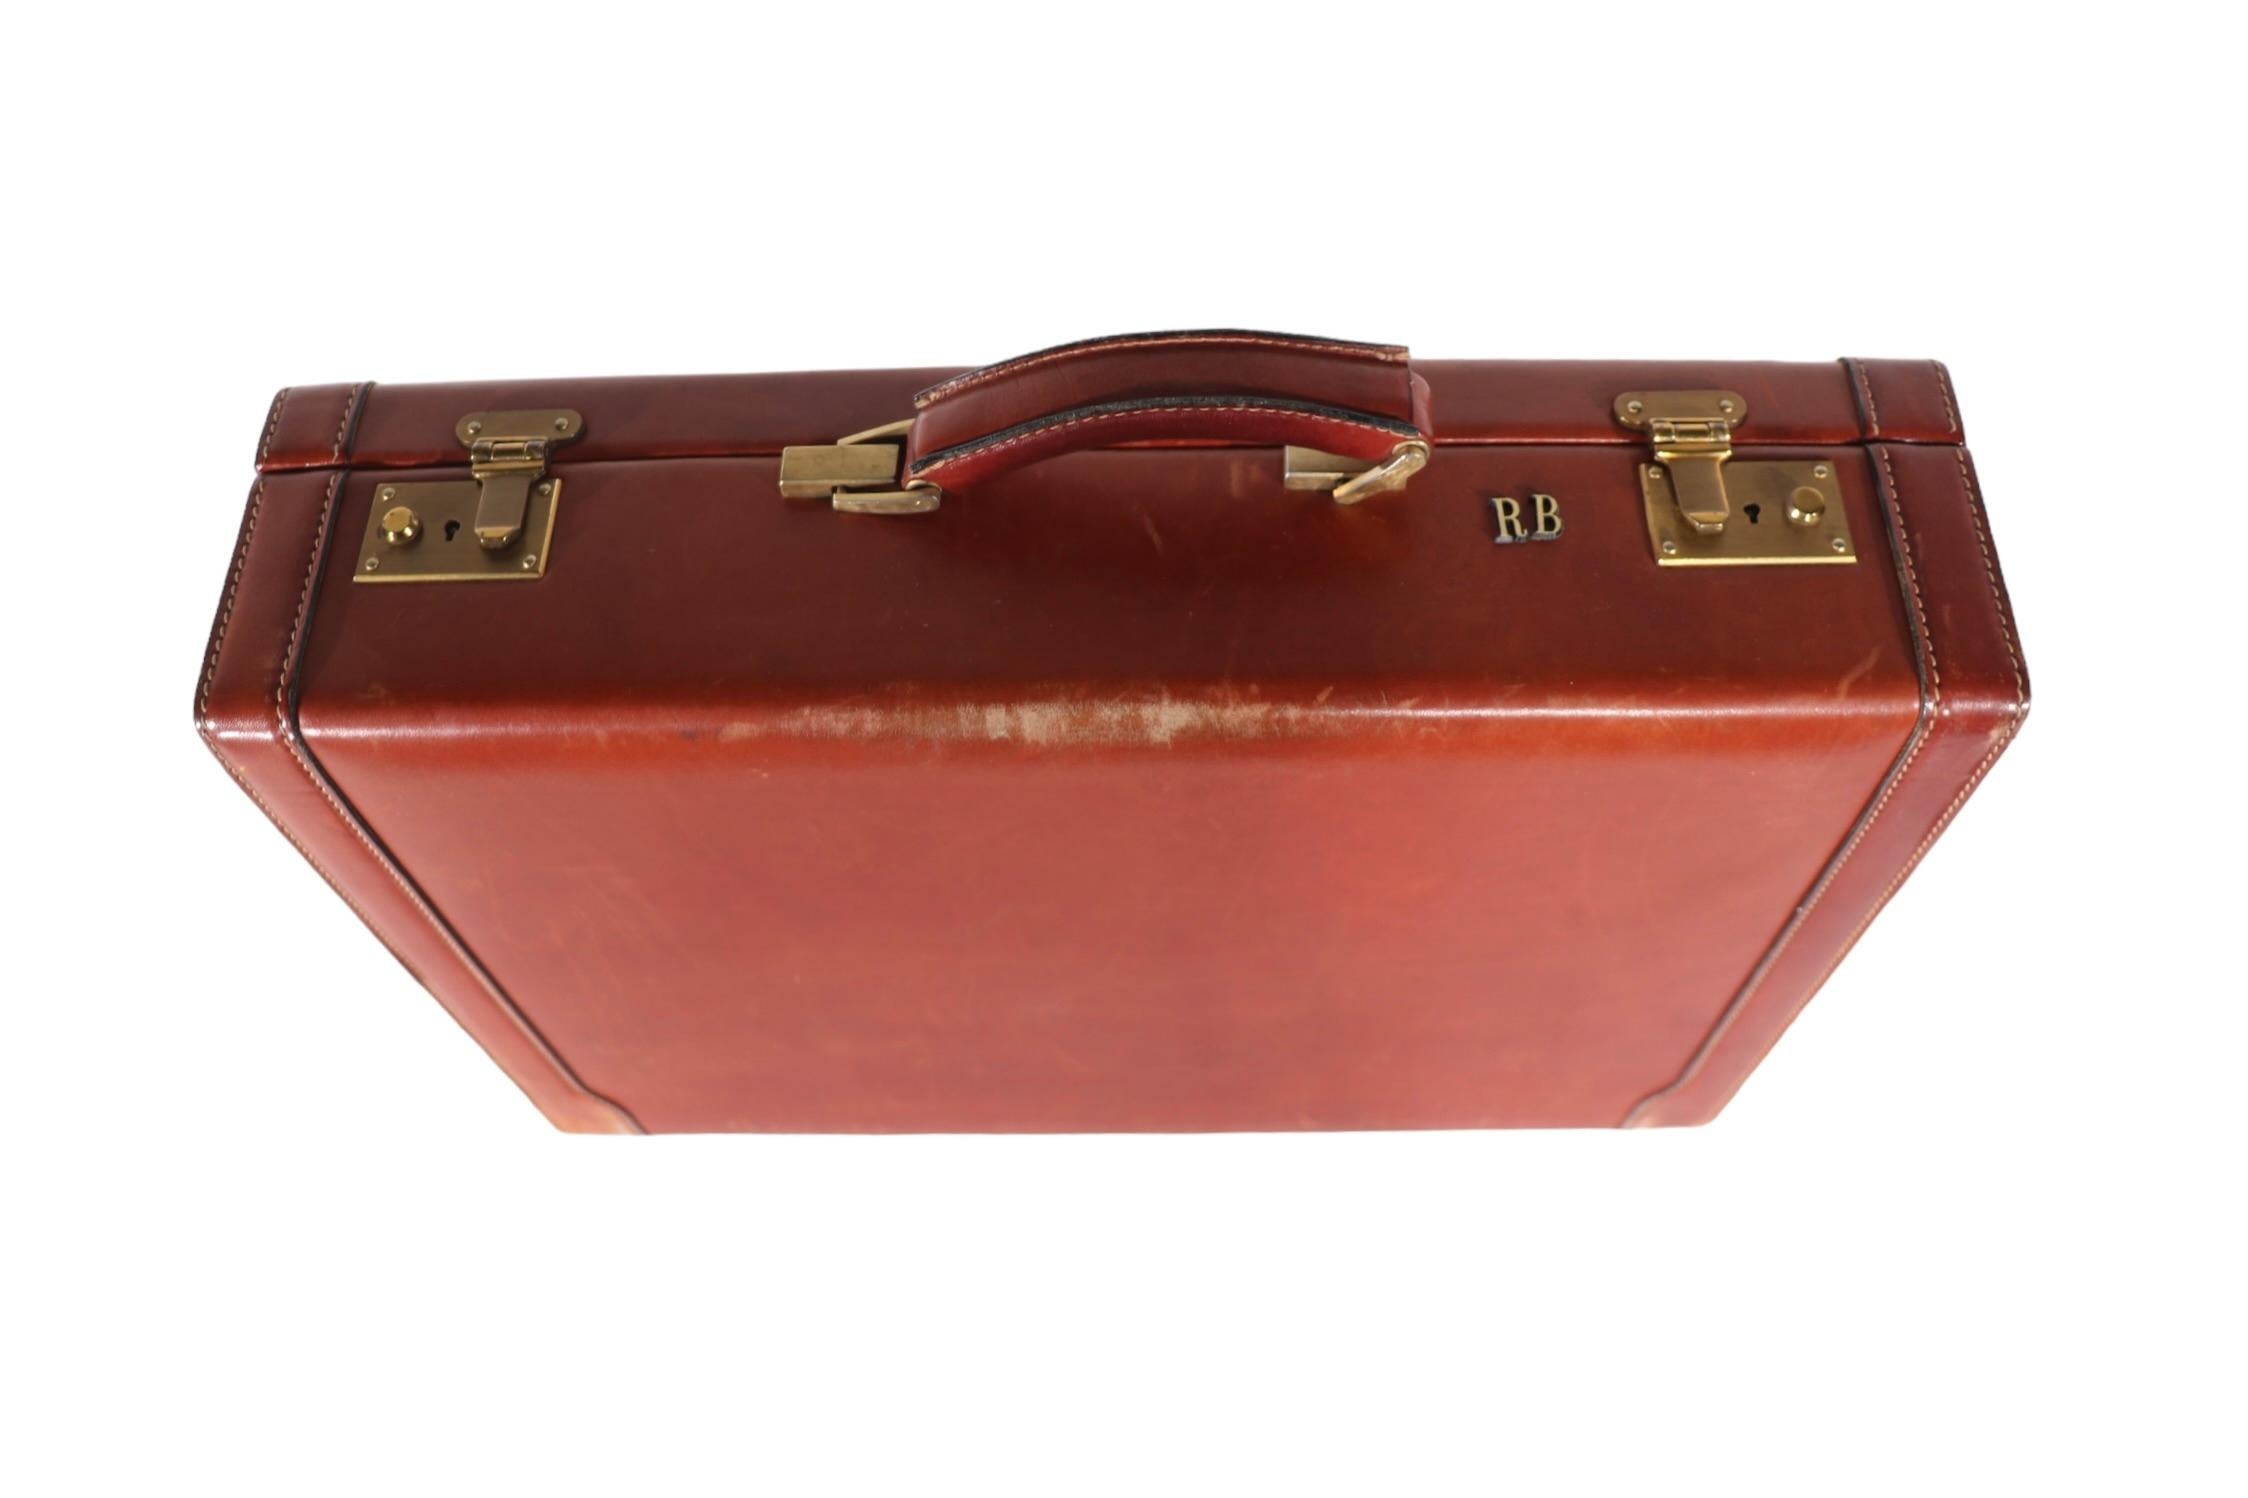  Mid Century Art Deco Hard Case Leather Attache Briefcase  after Bally, Hermes  For Sale 4